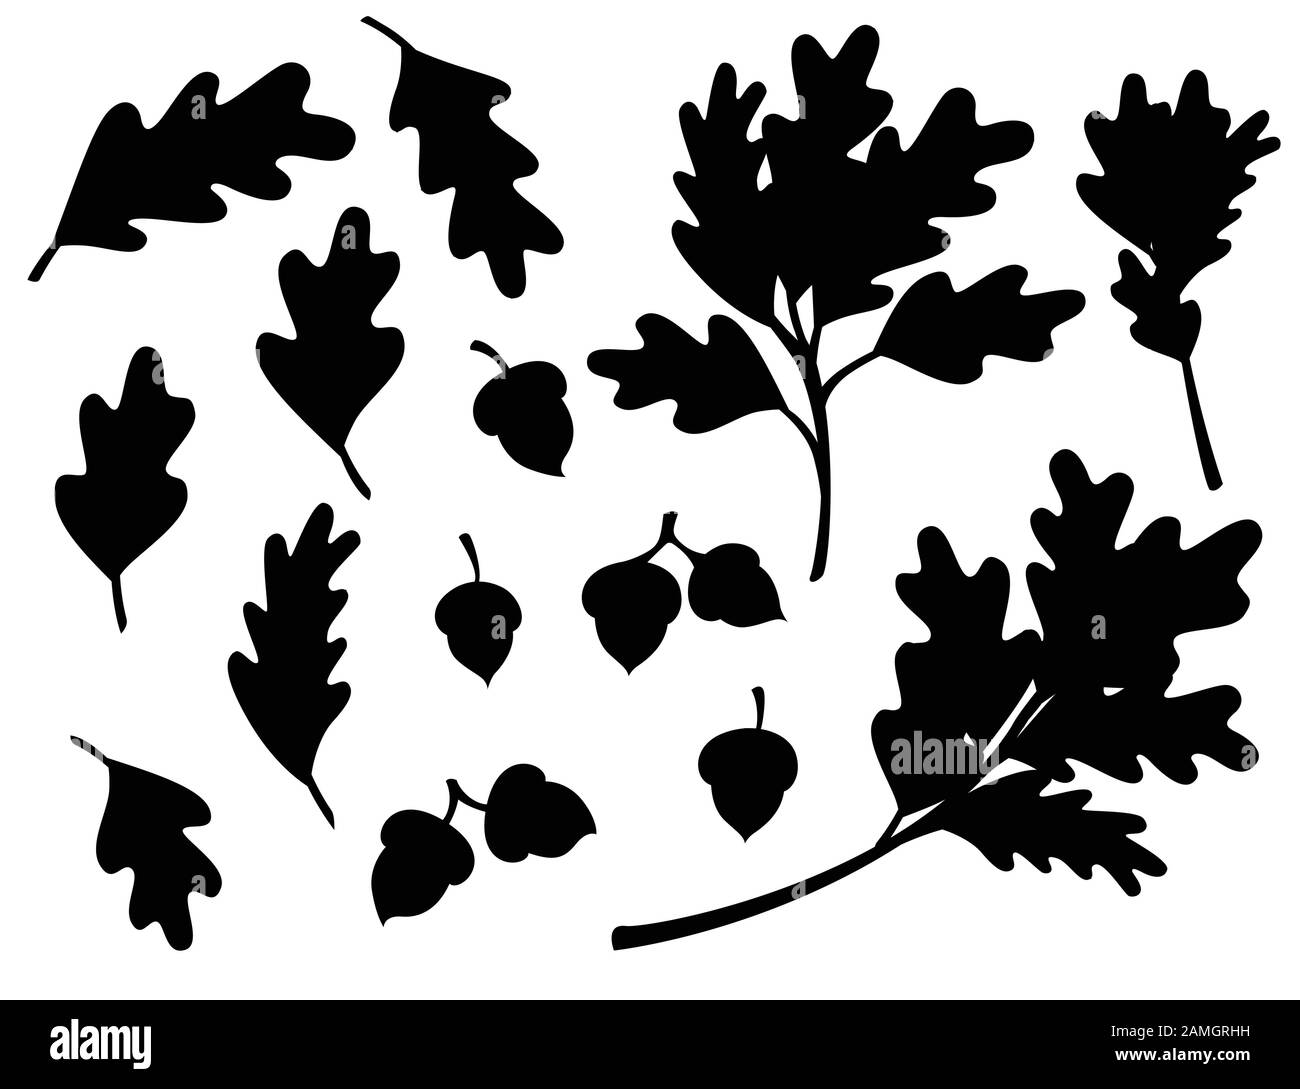 Black silhouette of various oak autumn leaves with acorn flat vector illustration isolated on white background. Stock Vector